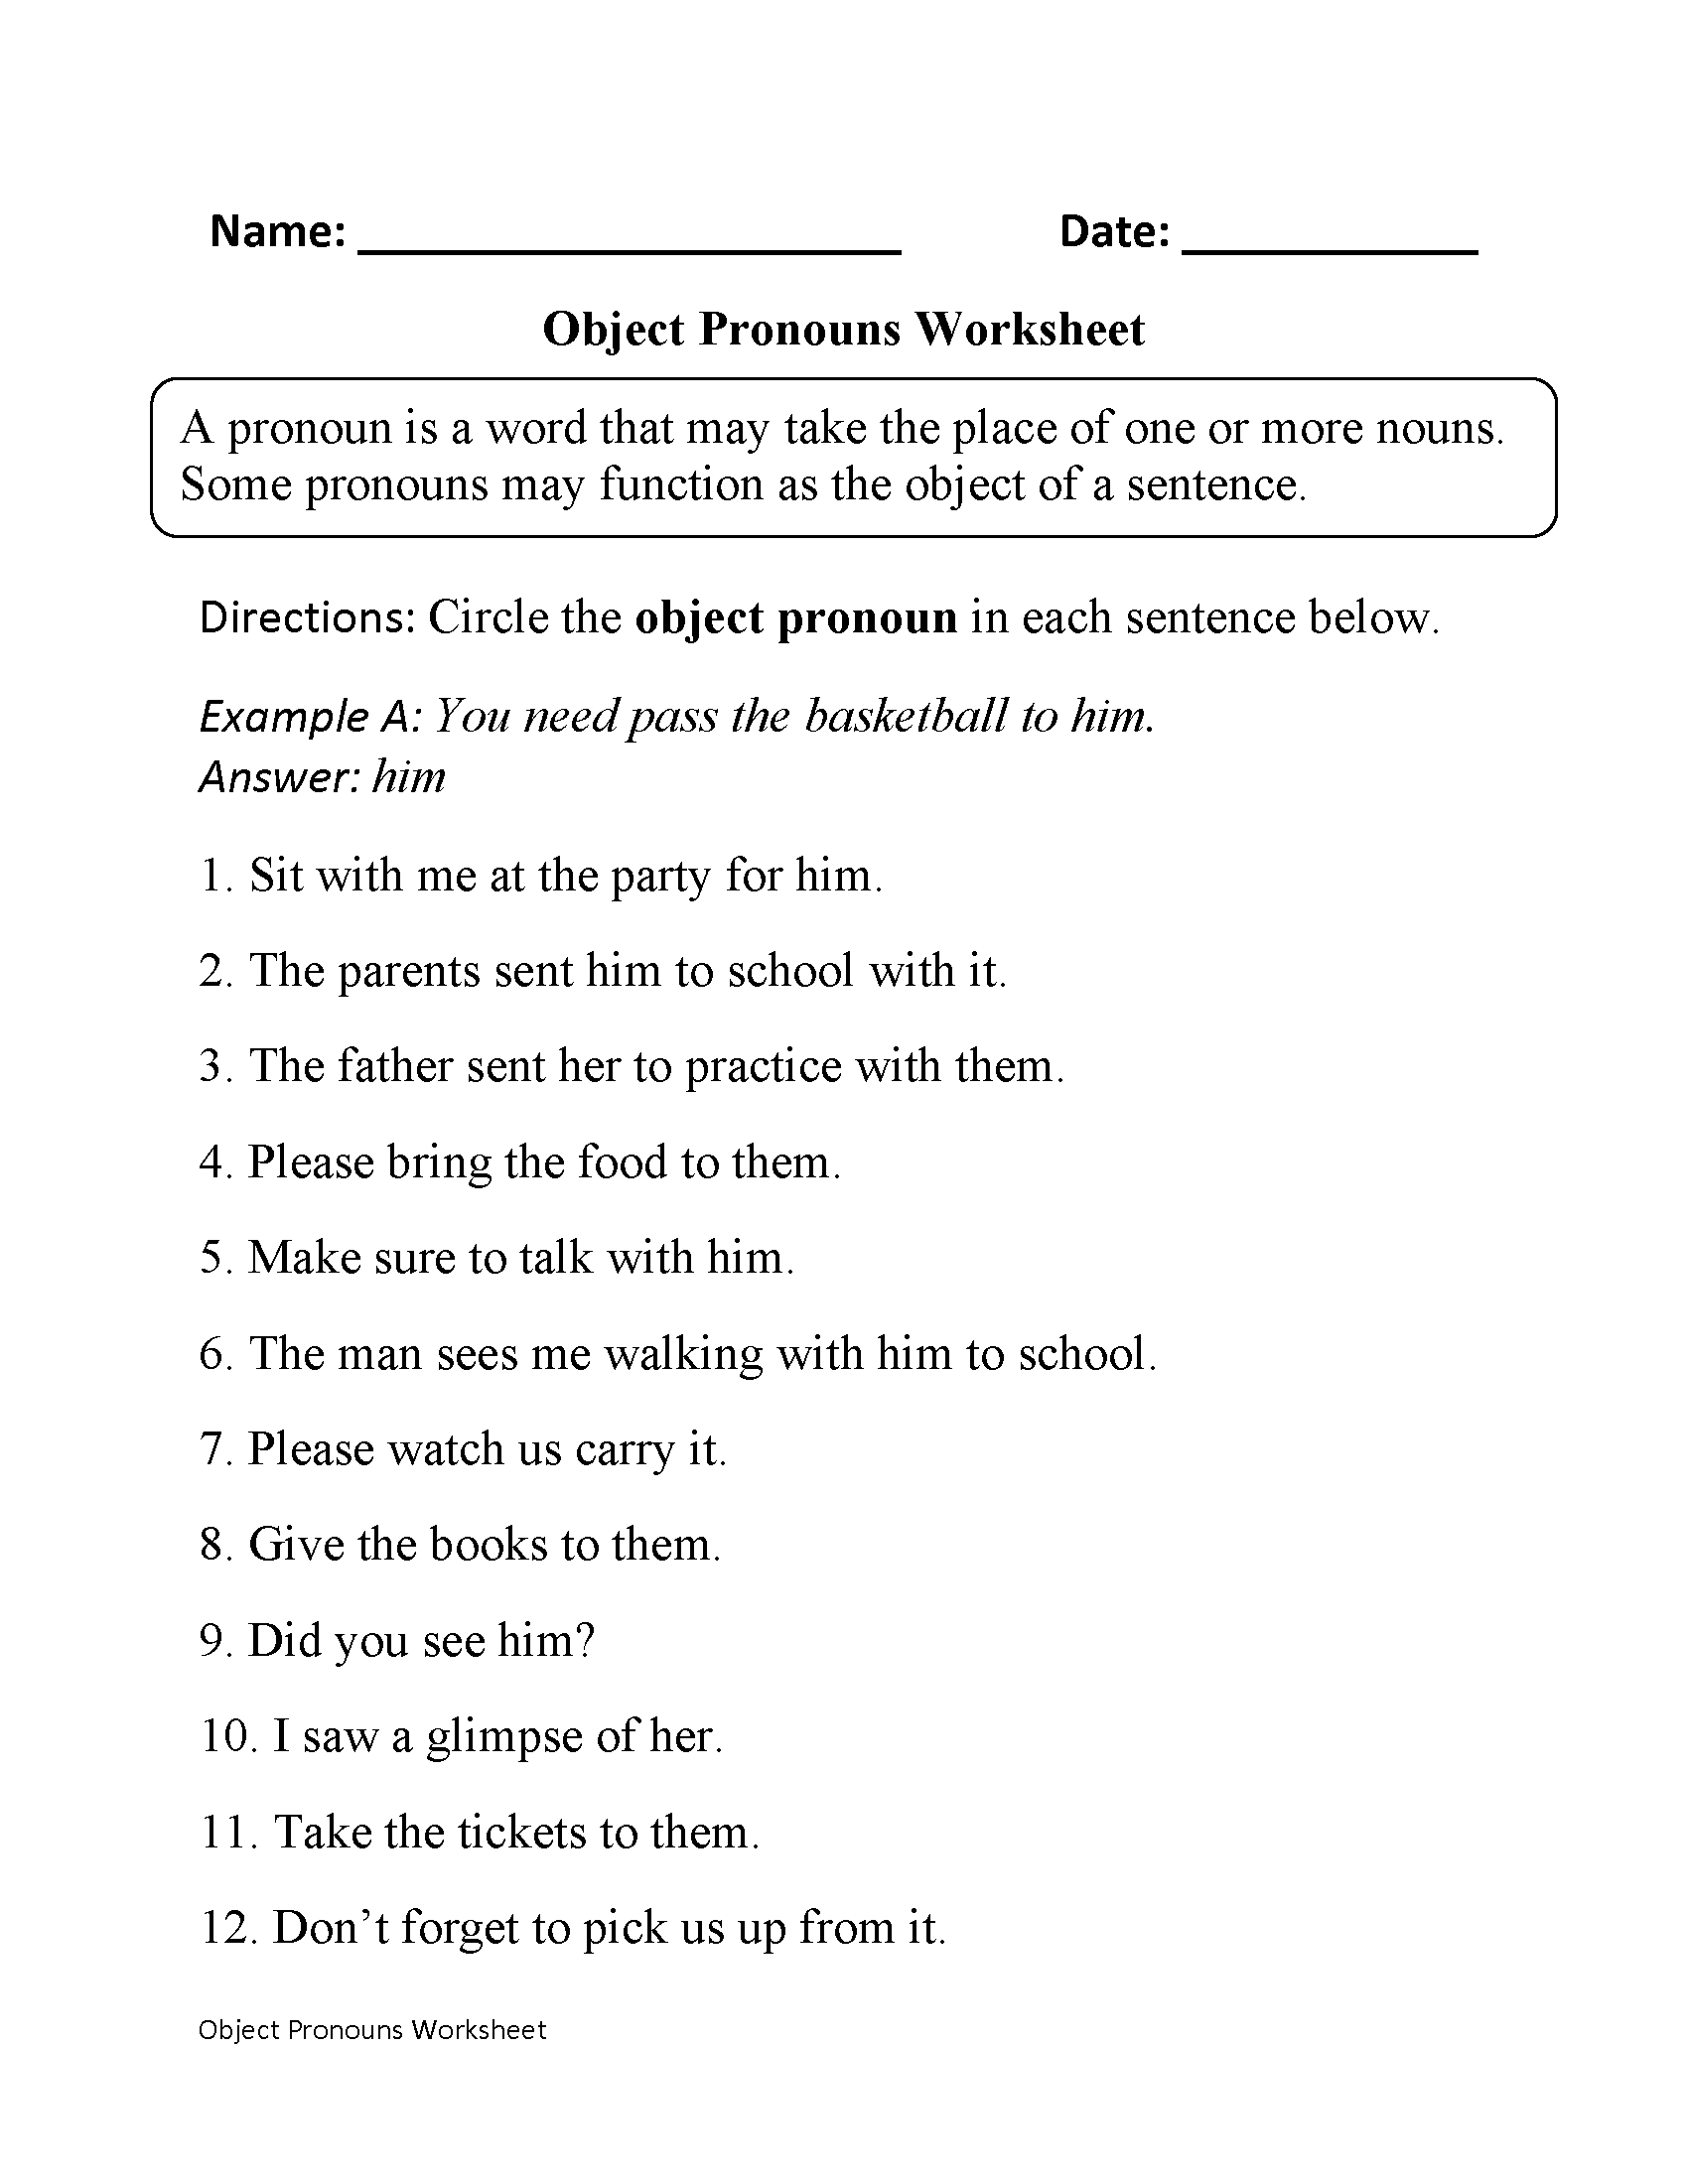 Subject and Object Pronouns Worksheets | Object Pronouns Worksheet